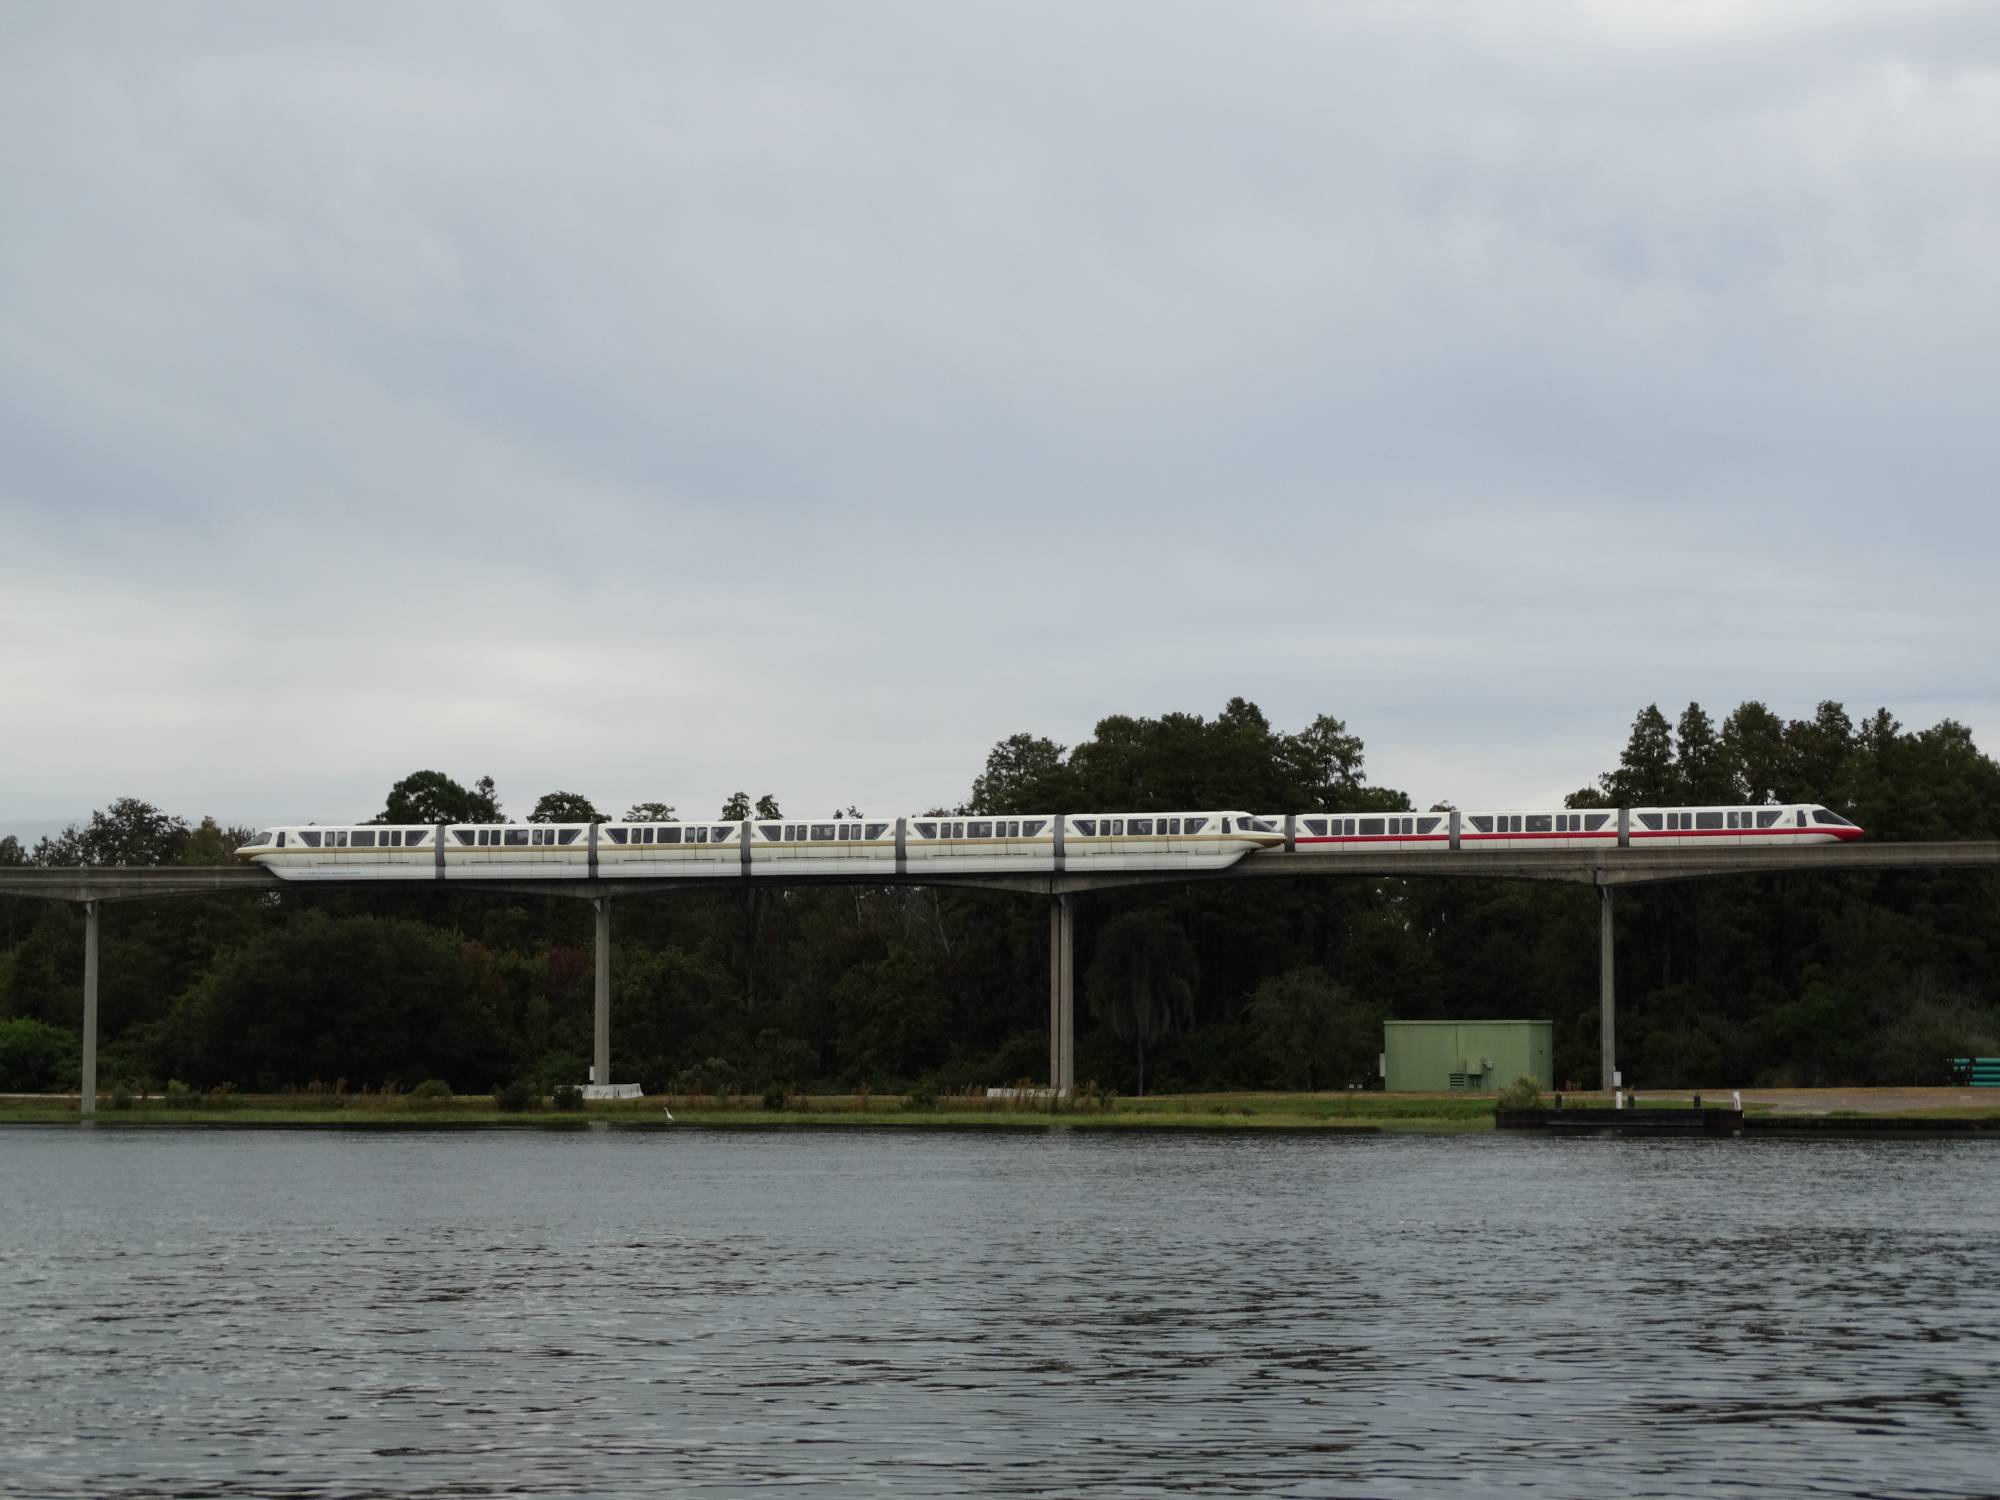 Monorails passing each other